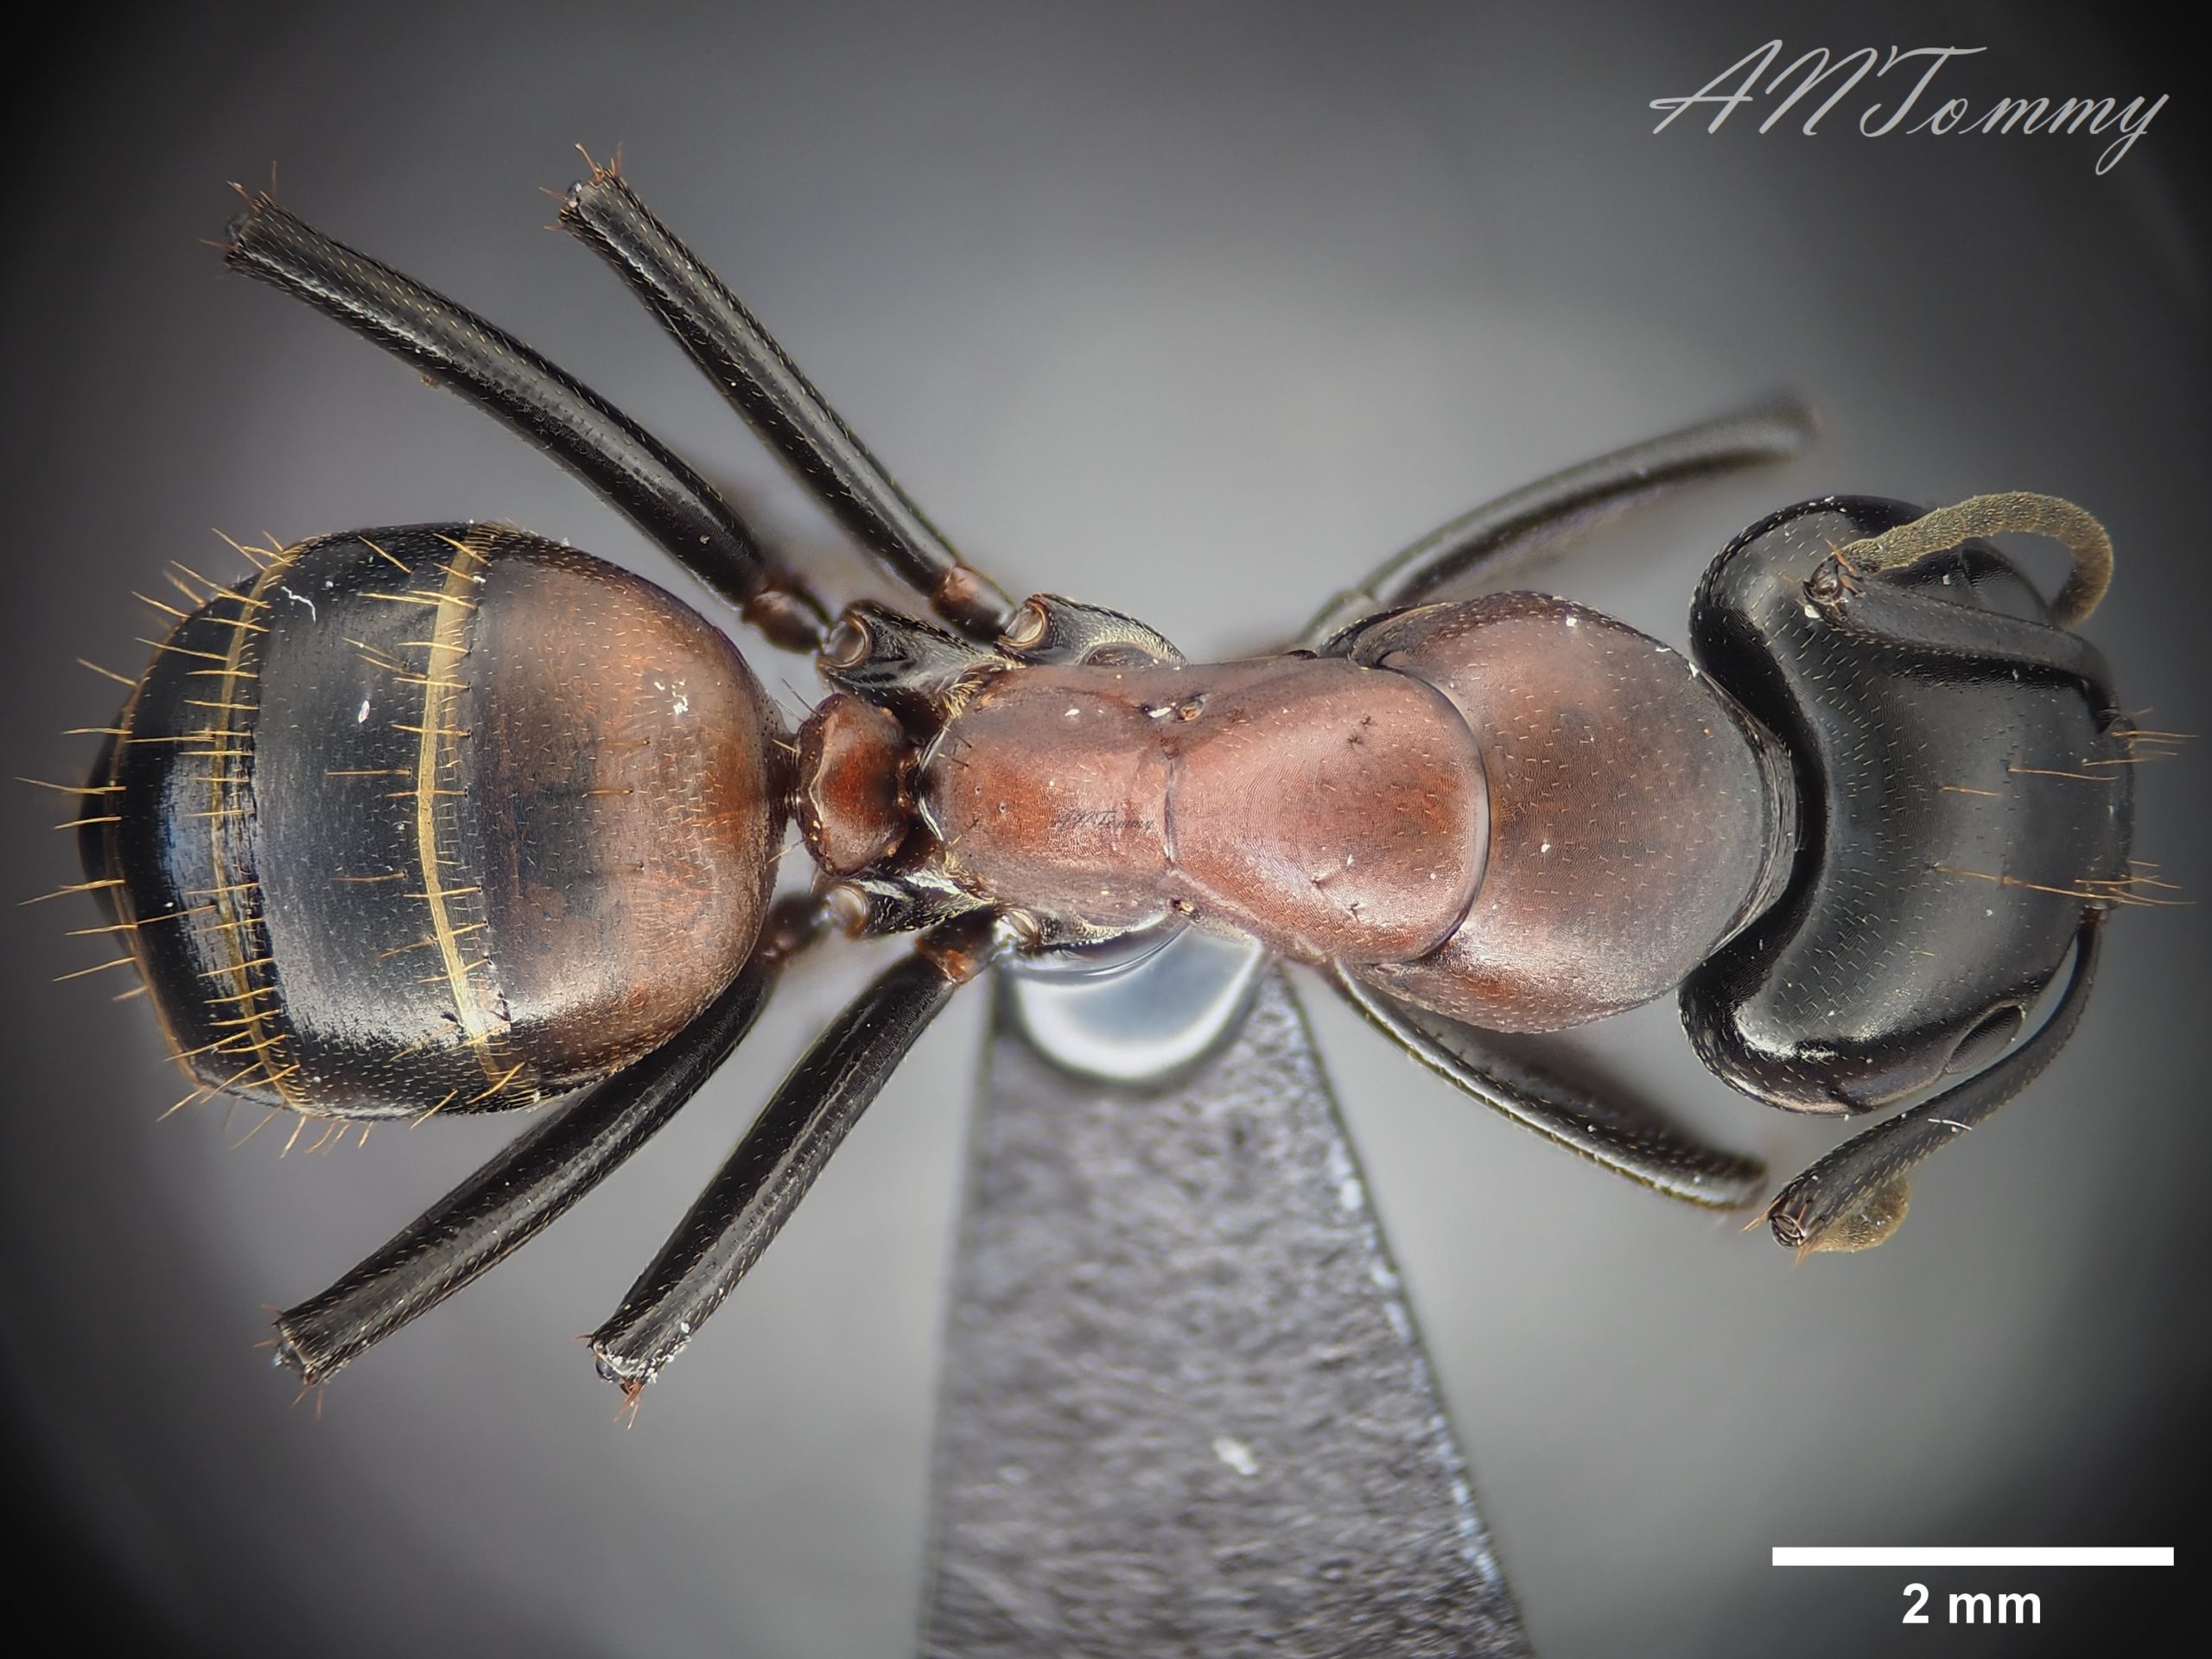 Camponotus obscuripes